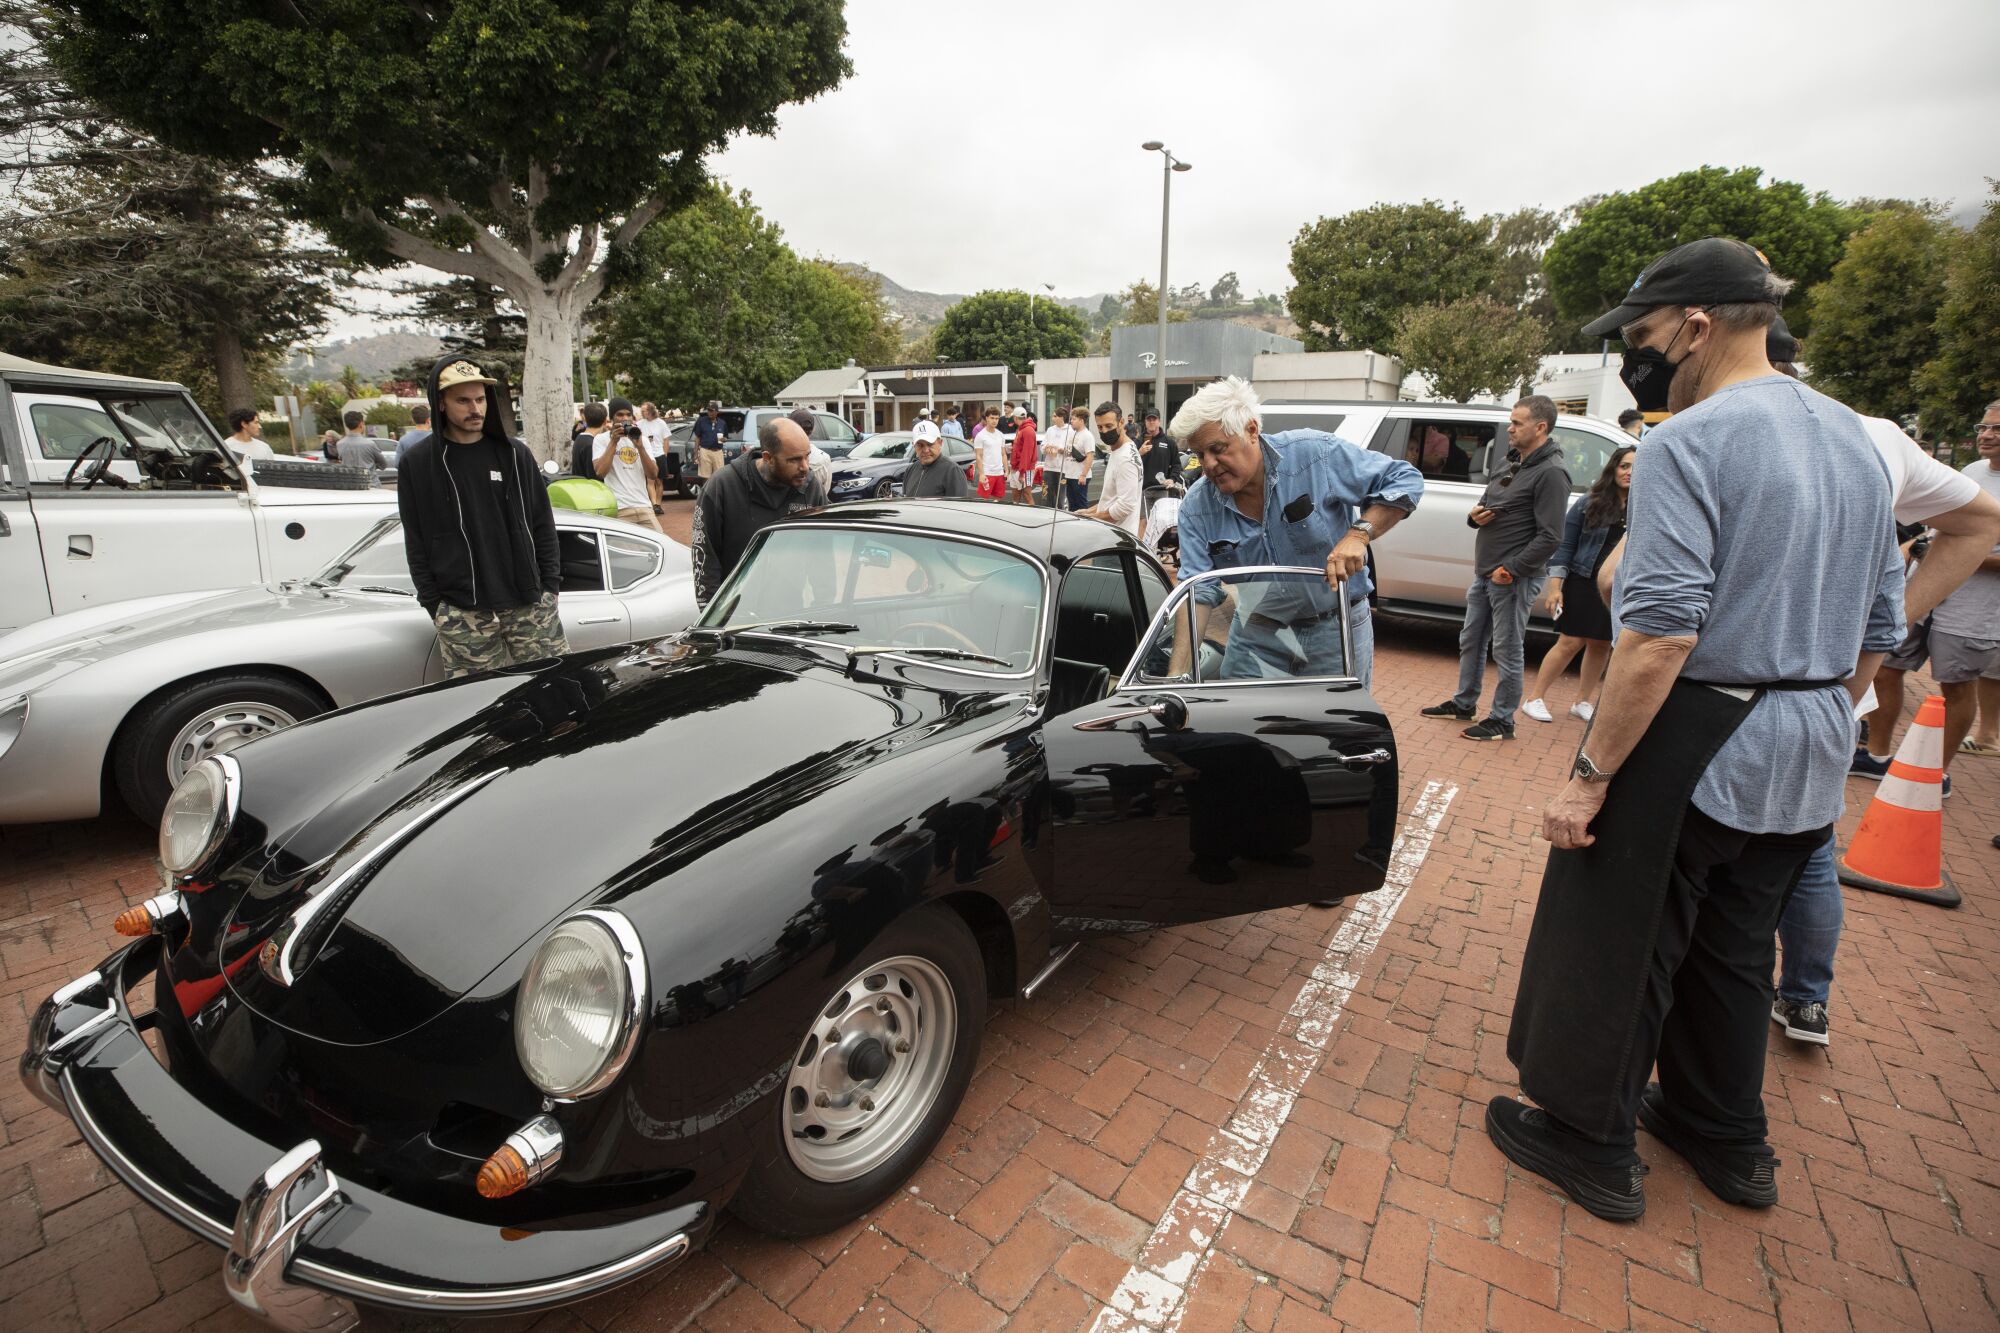 Bill Miller, right, the owner of Malibu Kitchen, greets Jay Leno, who pulled up in his 1963 Porsche Carrera 2.